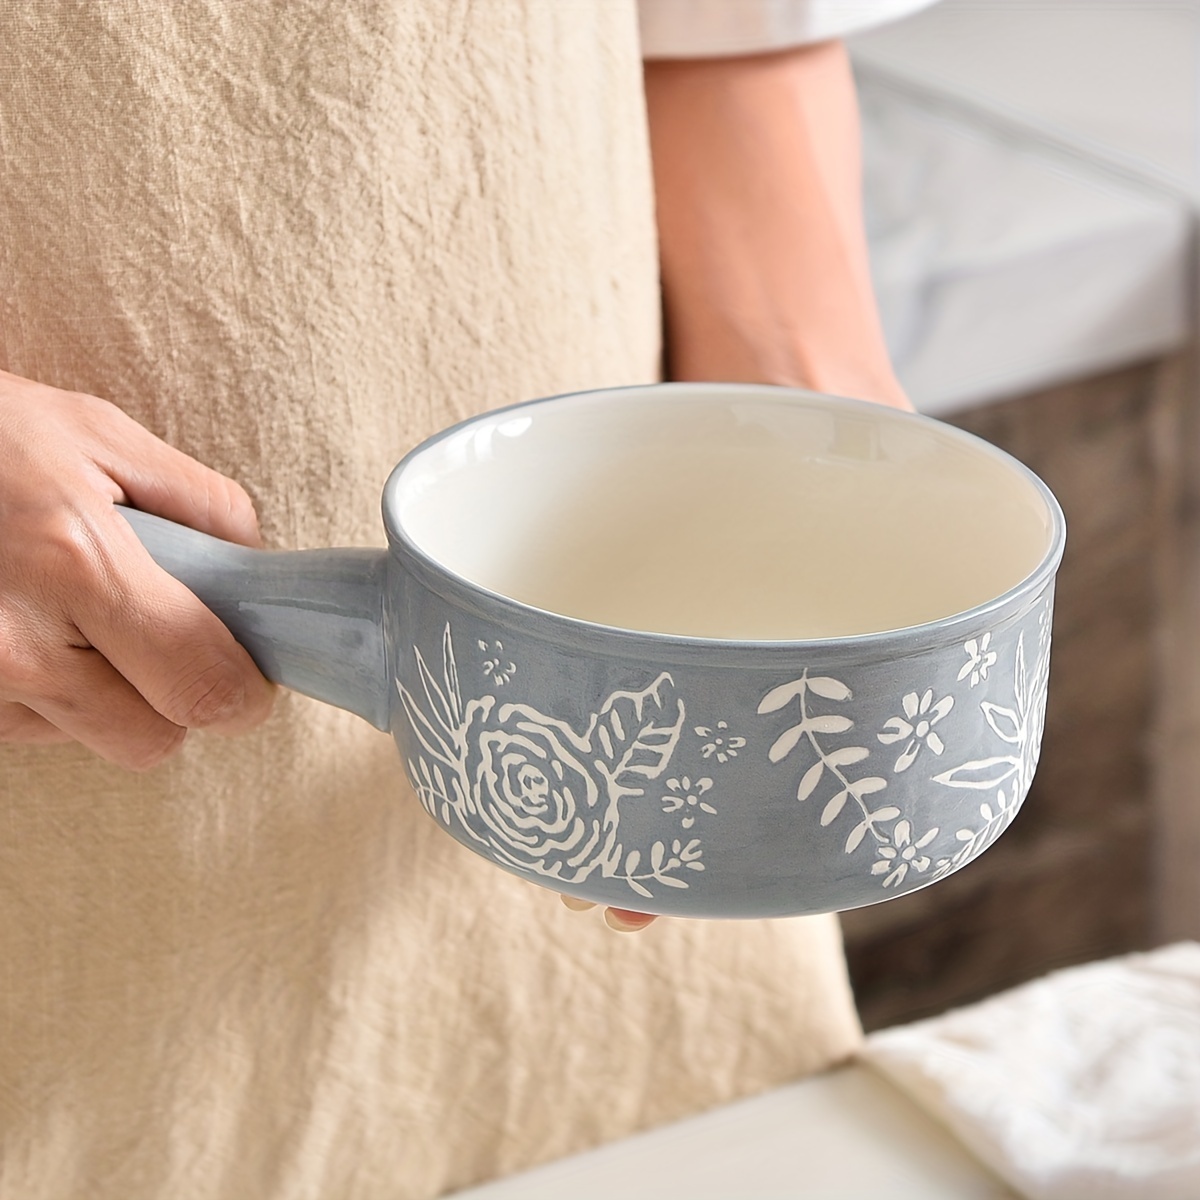 Ceramic Soup Bowls With Handles And Lids, French Onion Soup Bowls